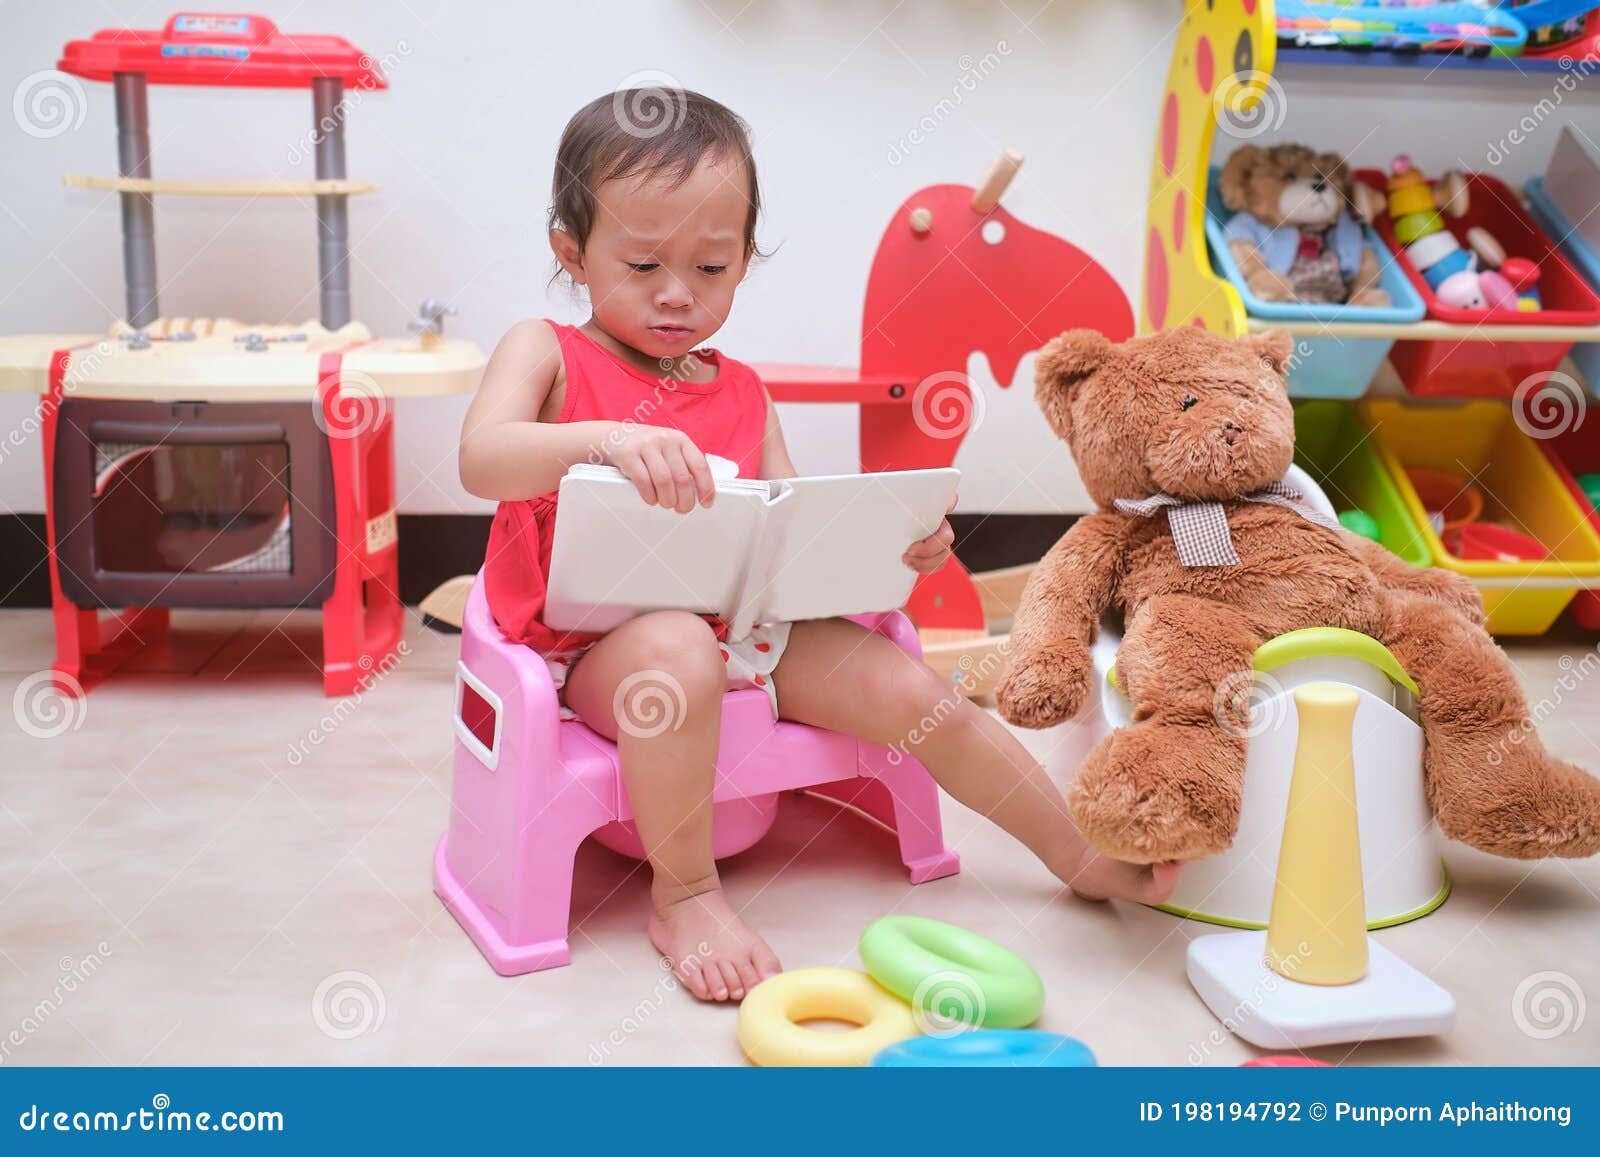 Asian Toddler Girl Child Sitting on Potty and Reading a Book with Toys ...